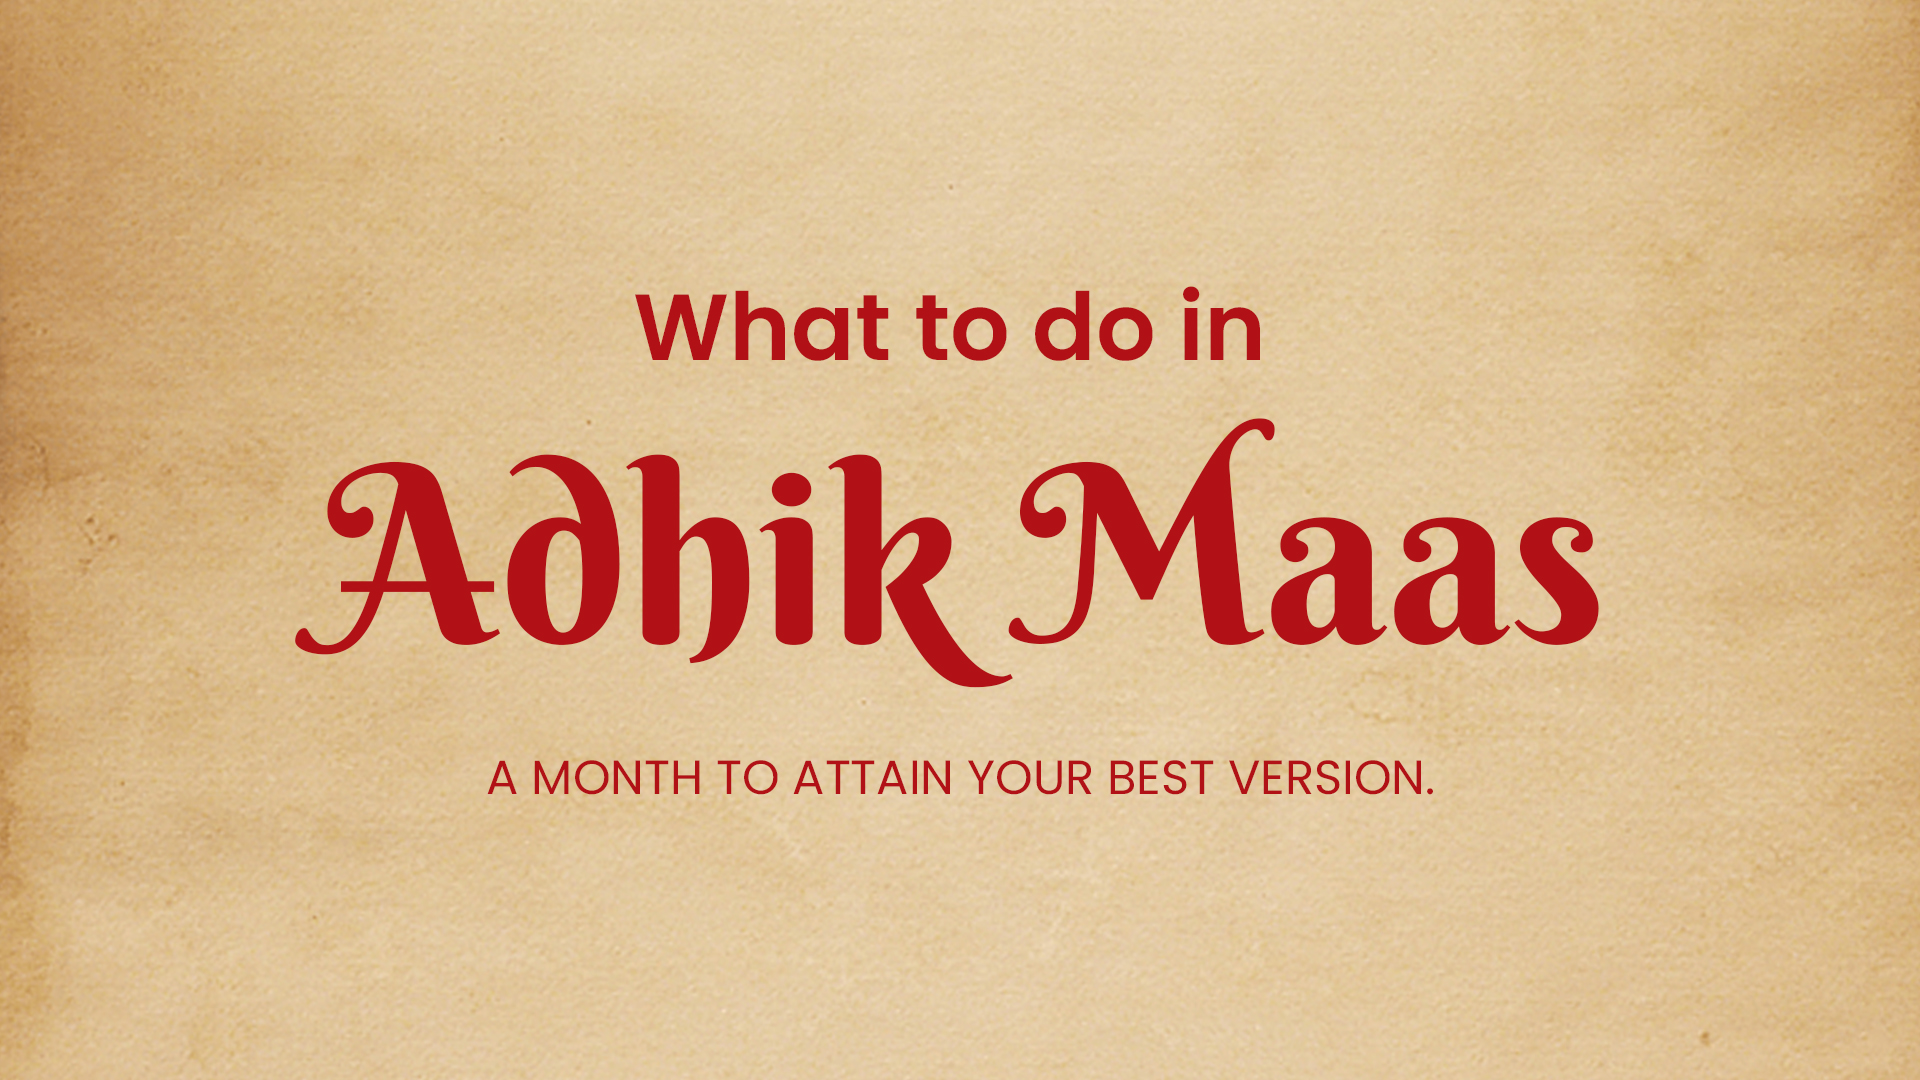 What to do in Adhik Maas